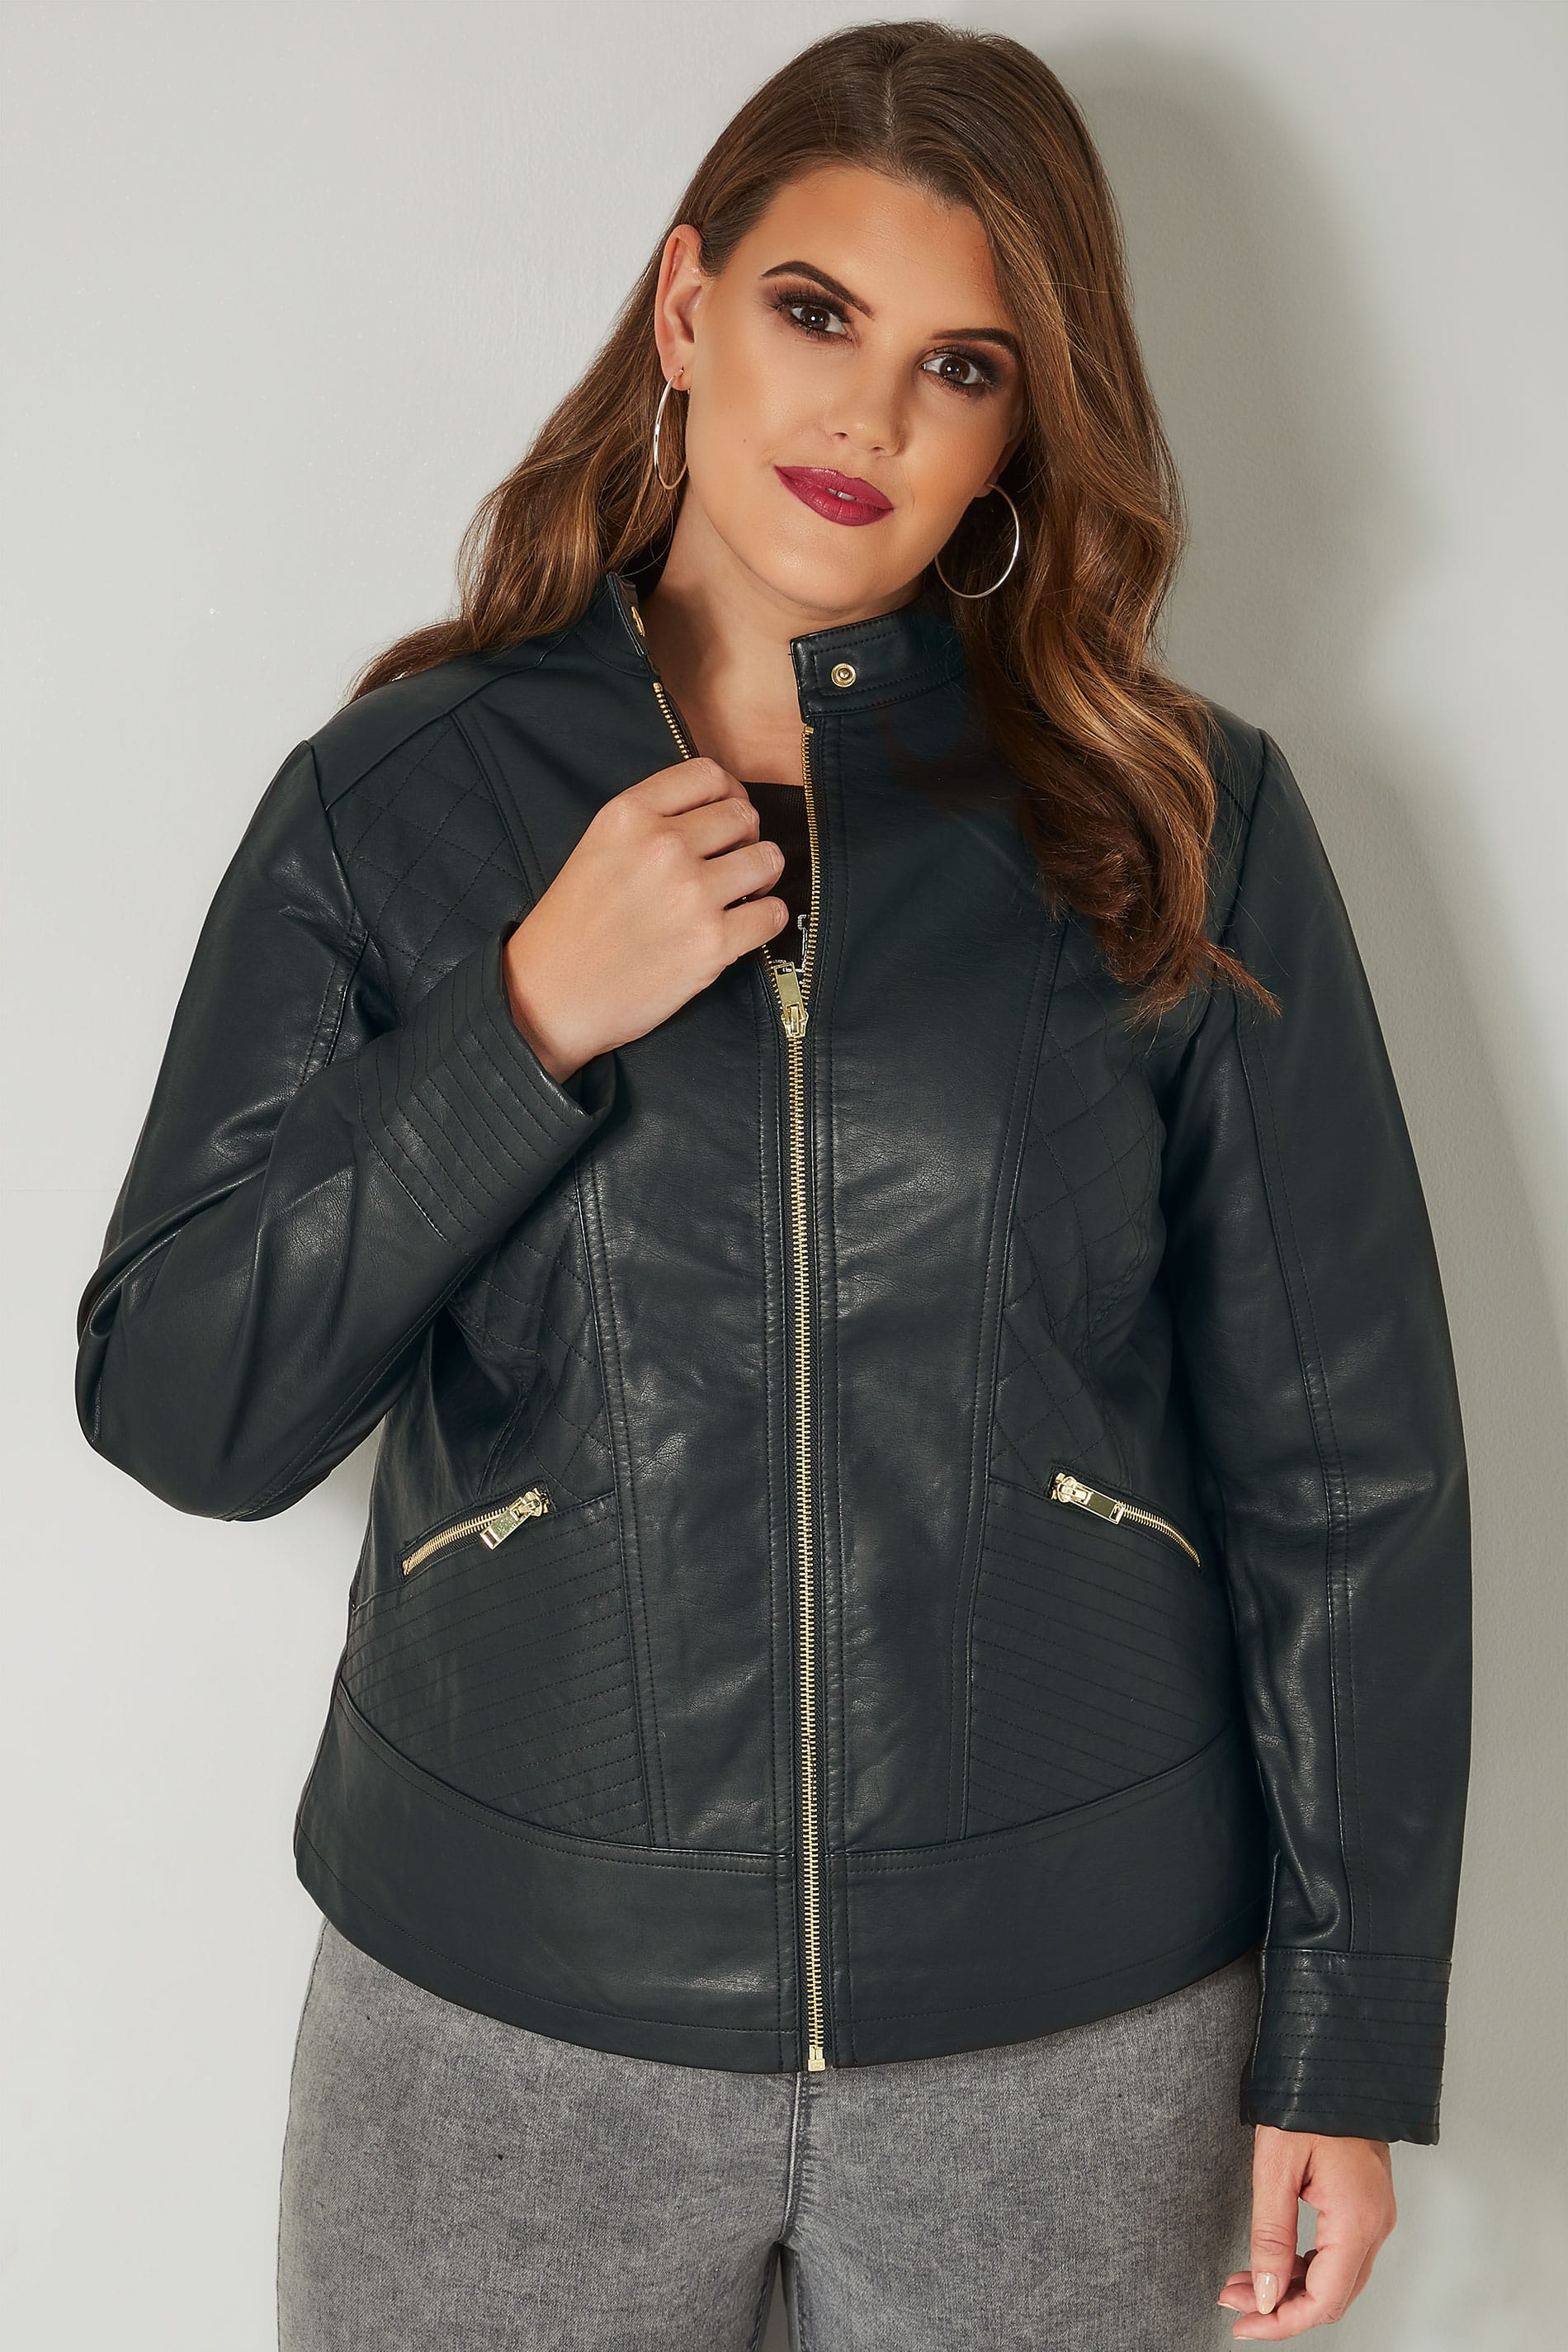 Black Faux Leather Quilted Jacket, plus size 16 to 36